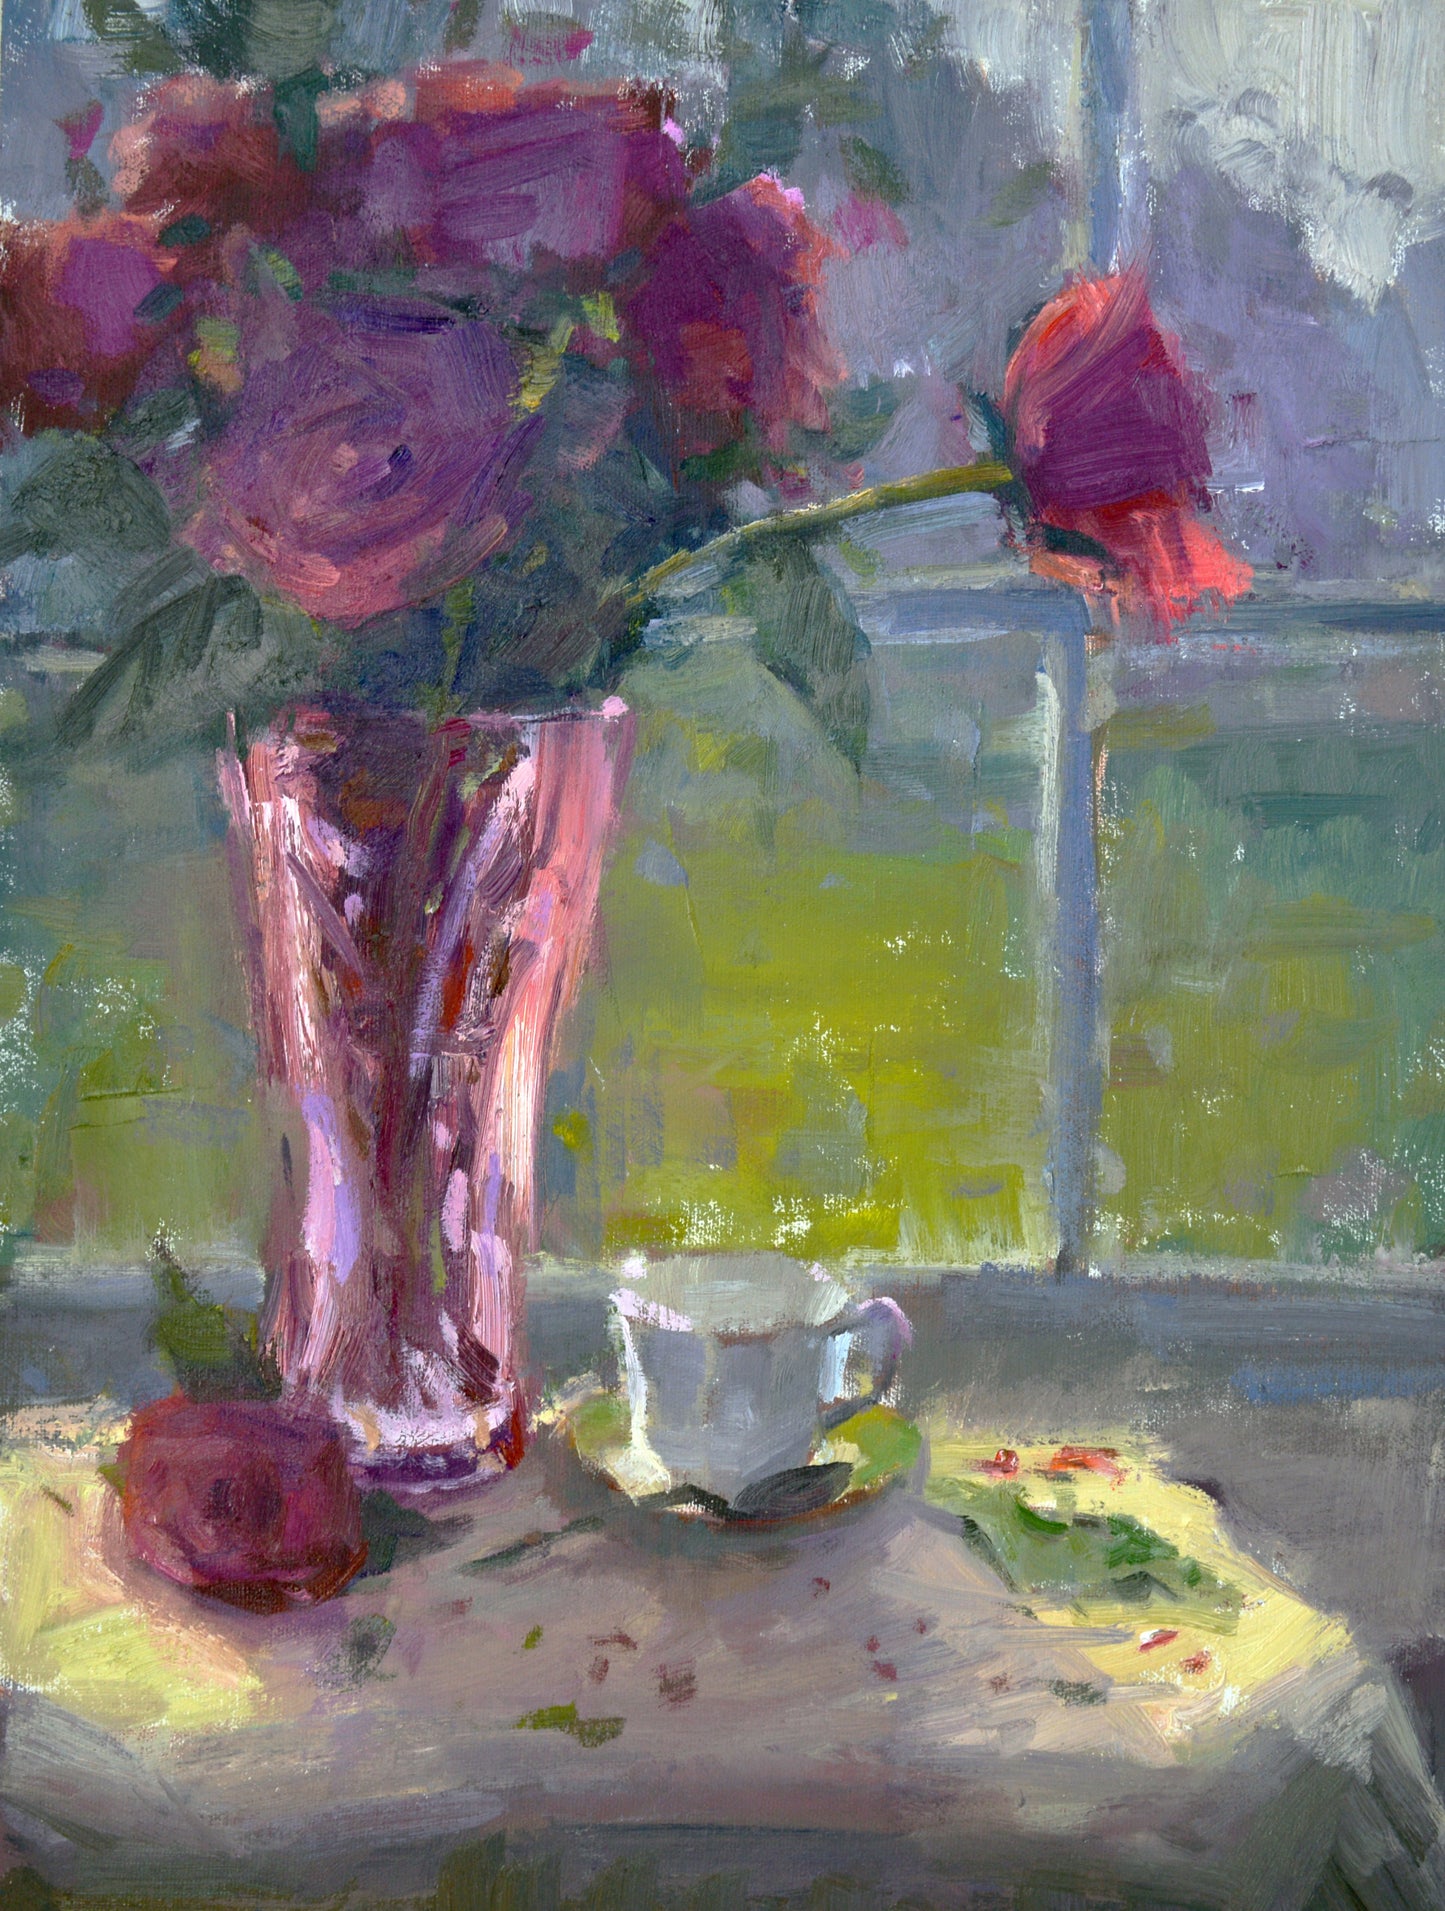 "Winter Roses" 16x12 inch original oil painting by Artist Kristina Sellers